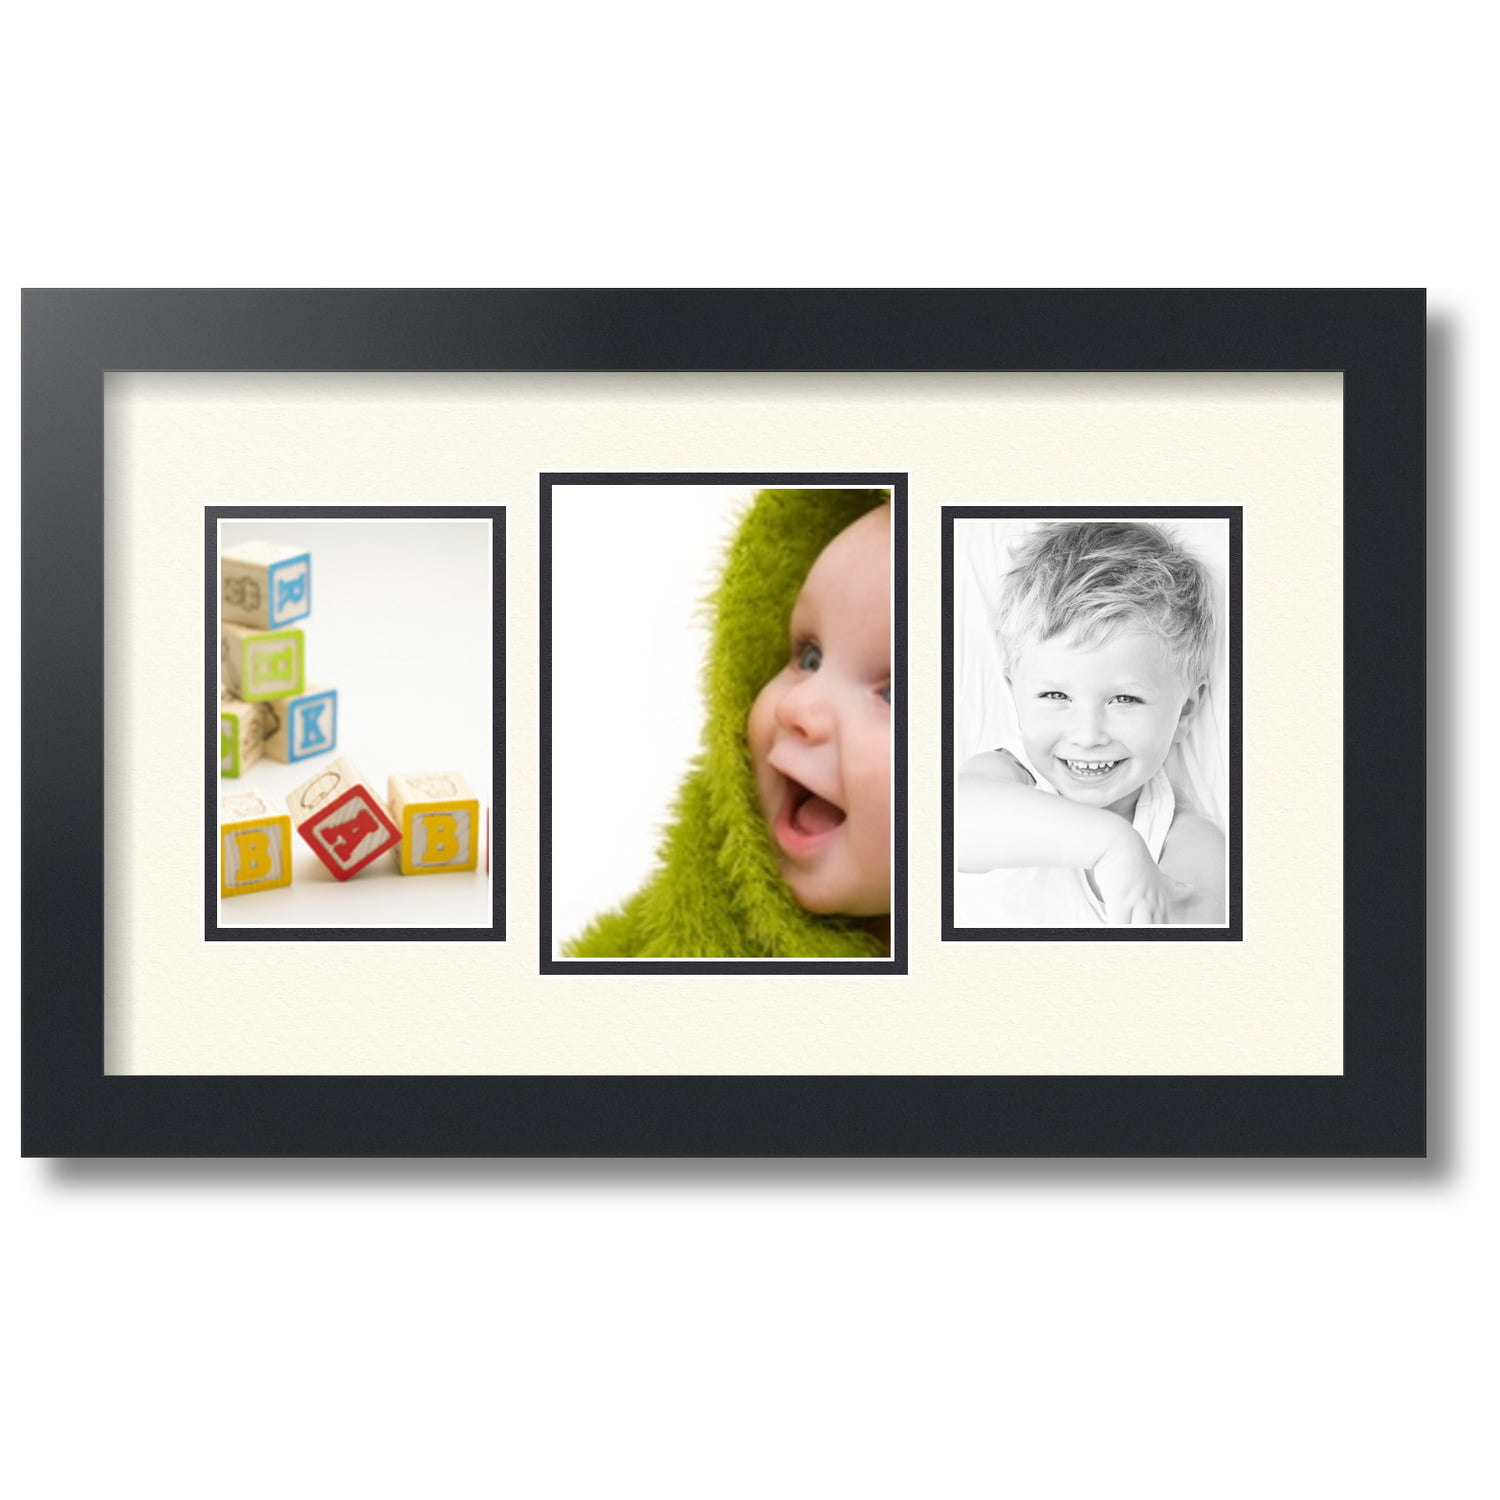 ArtToFrames Collage Photo Frame Double Mat with 2-5x7 4x6 Openings with Satin Black Frame and Sandpiper mat.